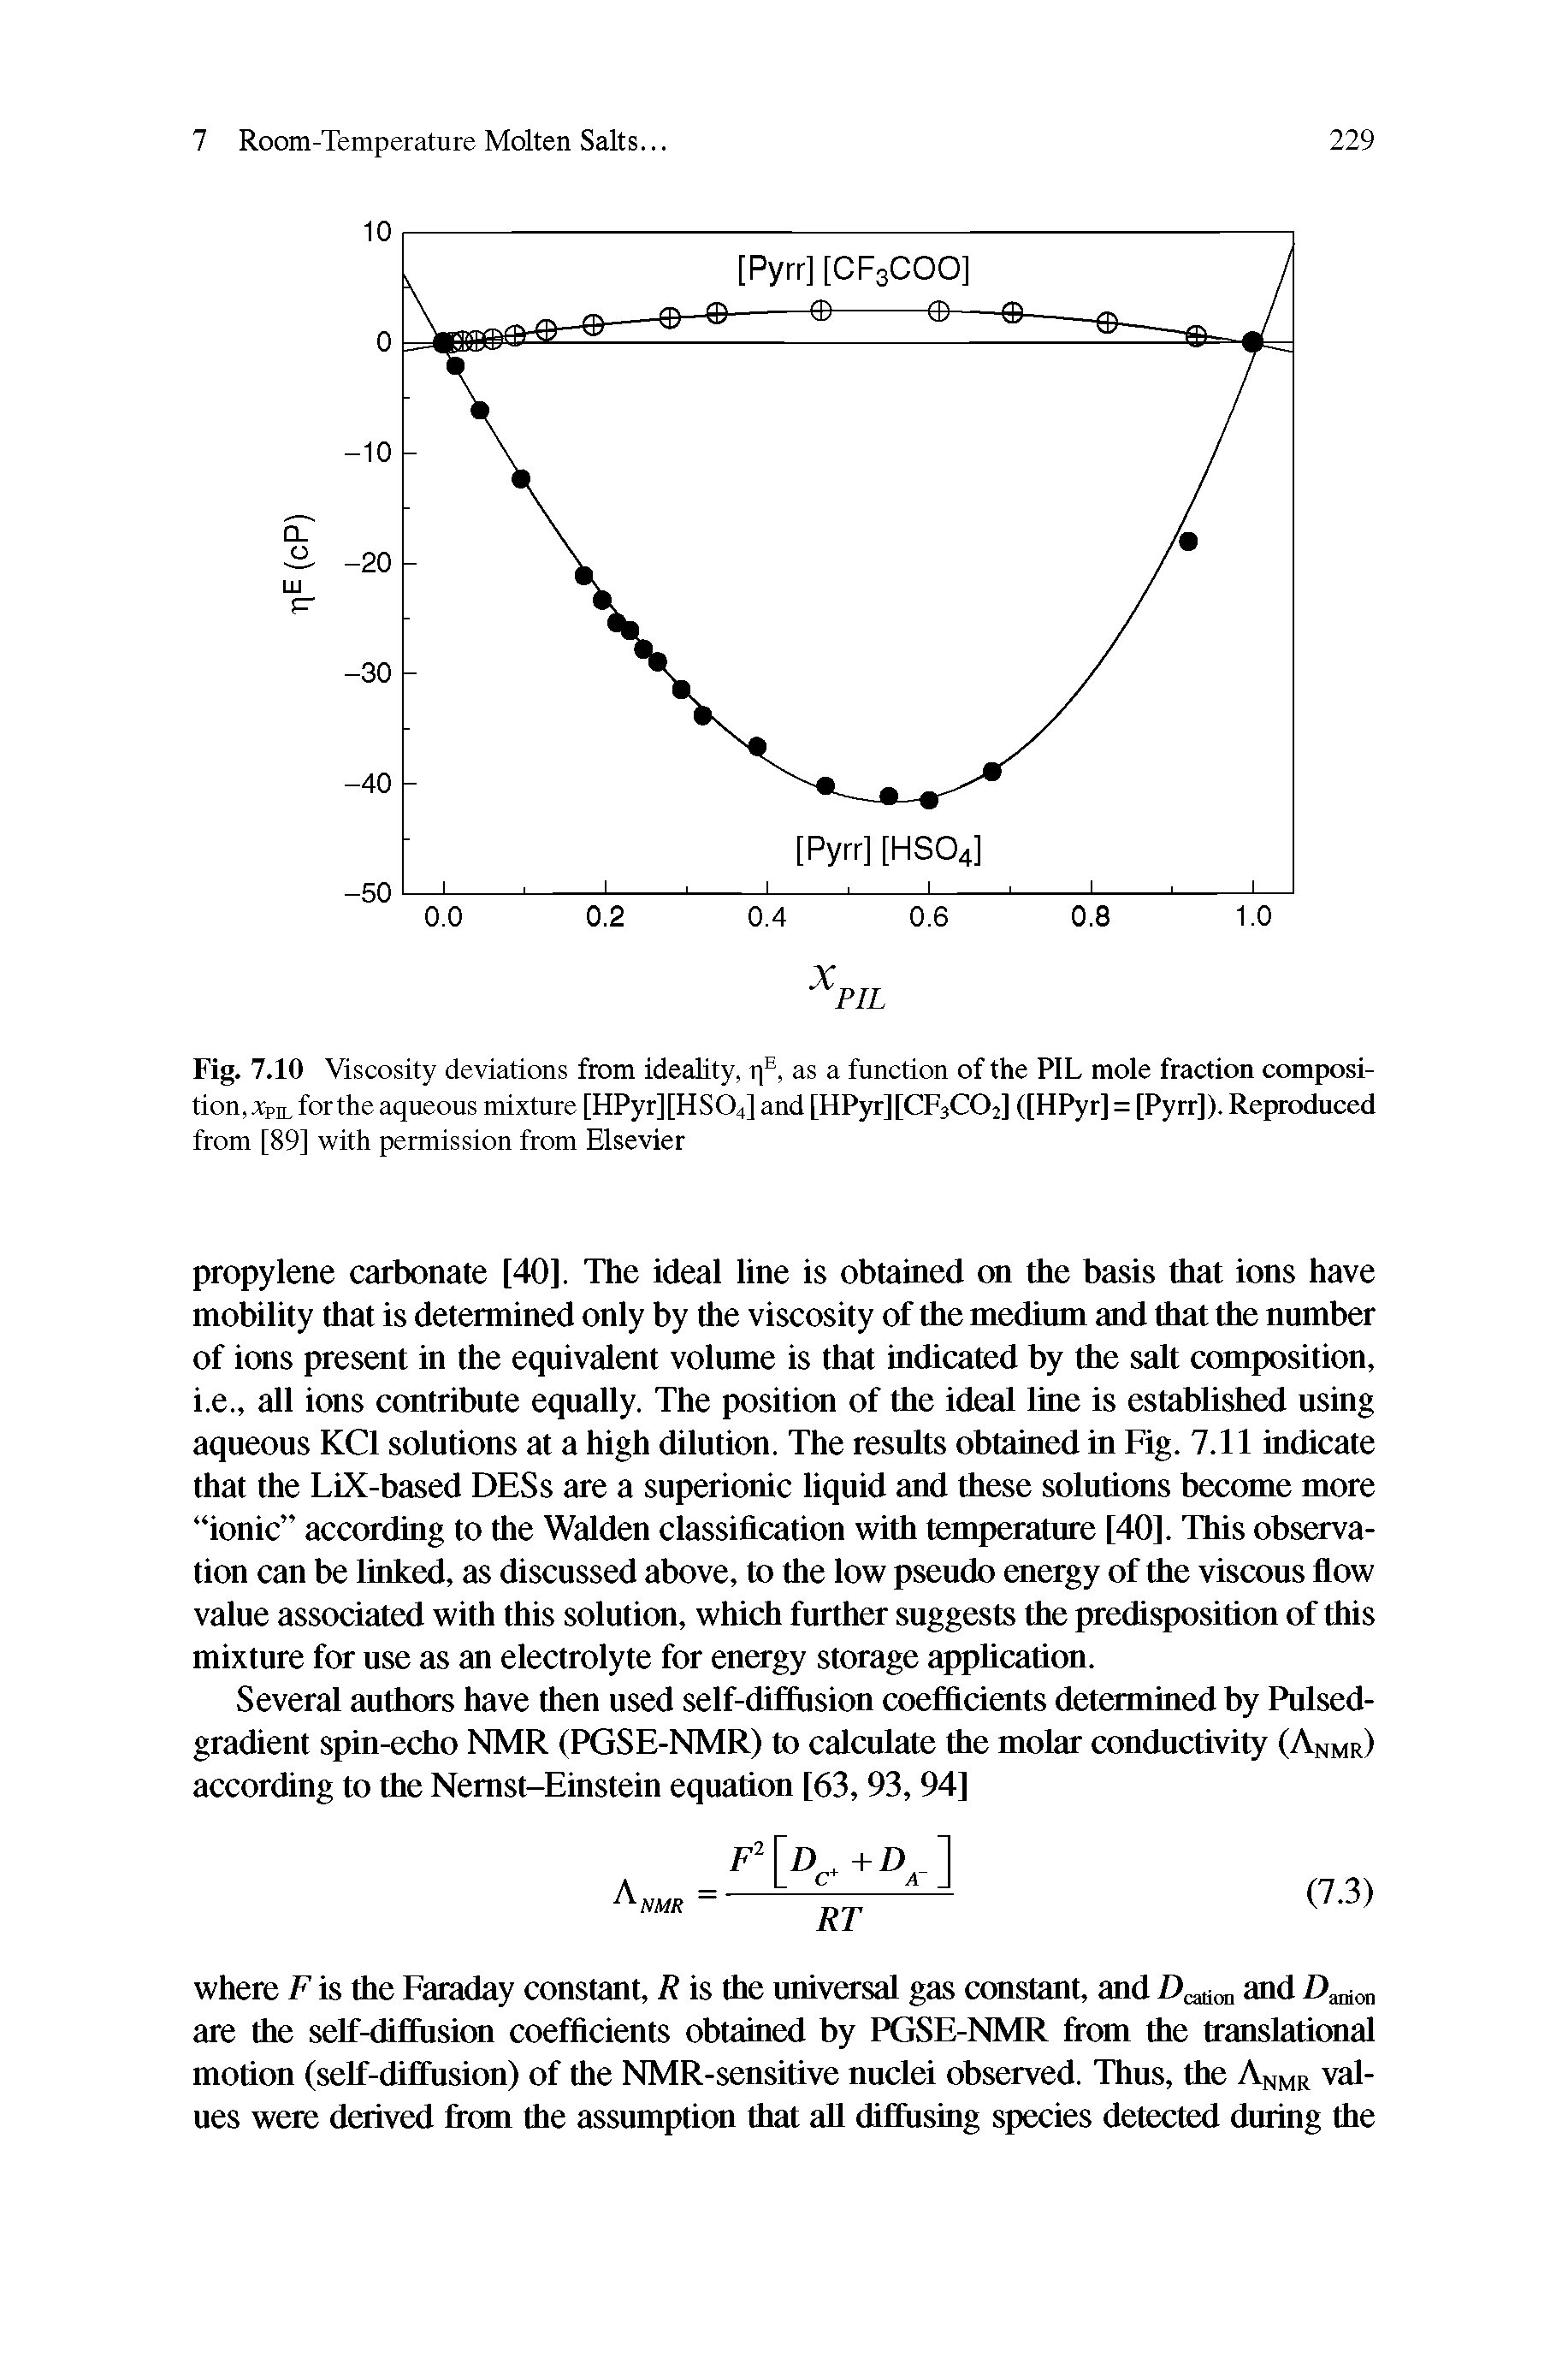 Fig. 7.10 Viscosity deviations from ideality, ri", as a function of the PIL mole fraction composition, XpiL for the aqueous mixture [HPyr][HS04] and [HPyrllCFsCOi] ([HPyr] = [Pyrr]). Reproduced from [89] with permission from Elsevier...